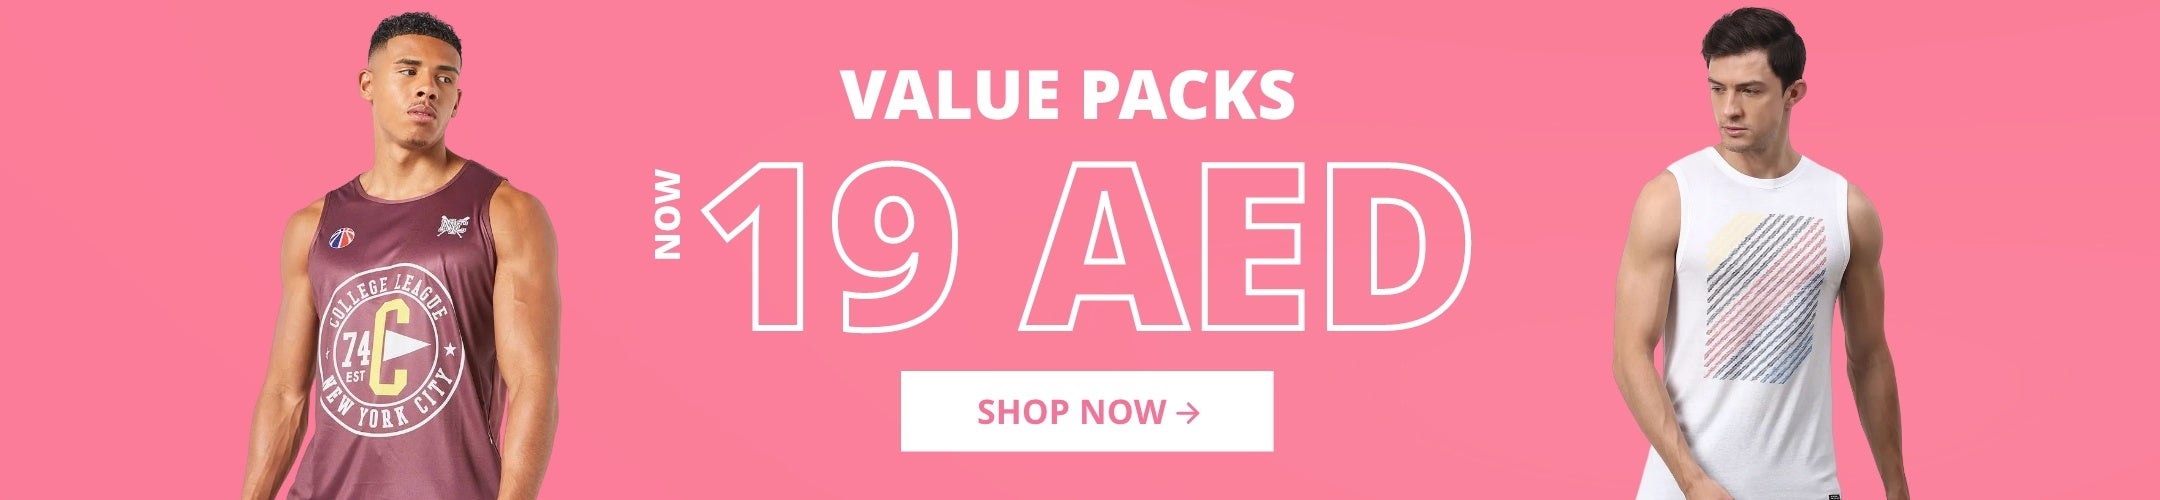 /men/mens-clothing/mens-sets-multipacks?page=1&f[current_price][min]=16&f[current_price][max]=59&sort[by]=current_price&sort[dir]=asc